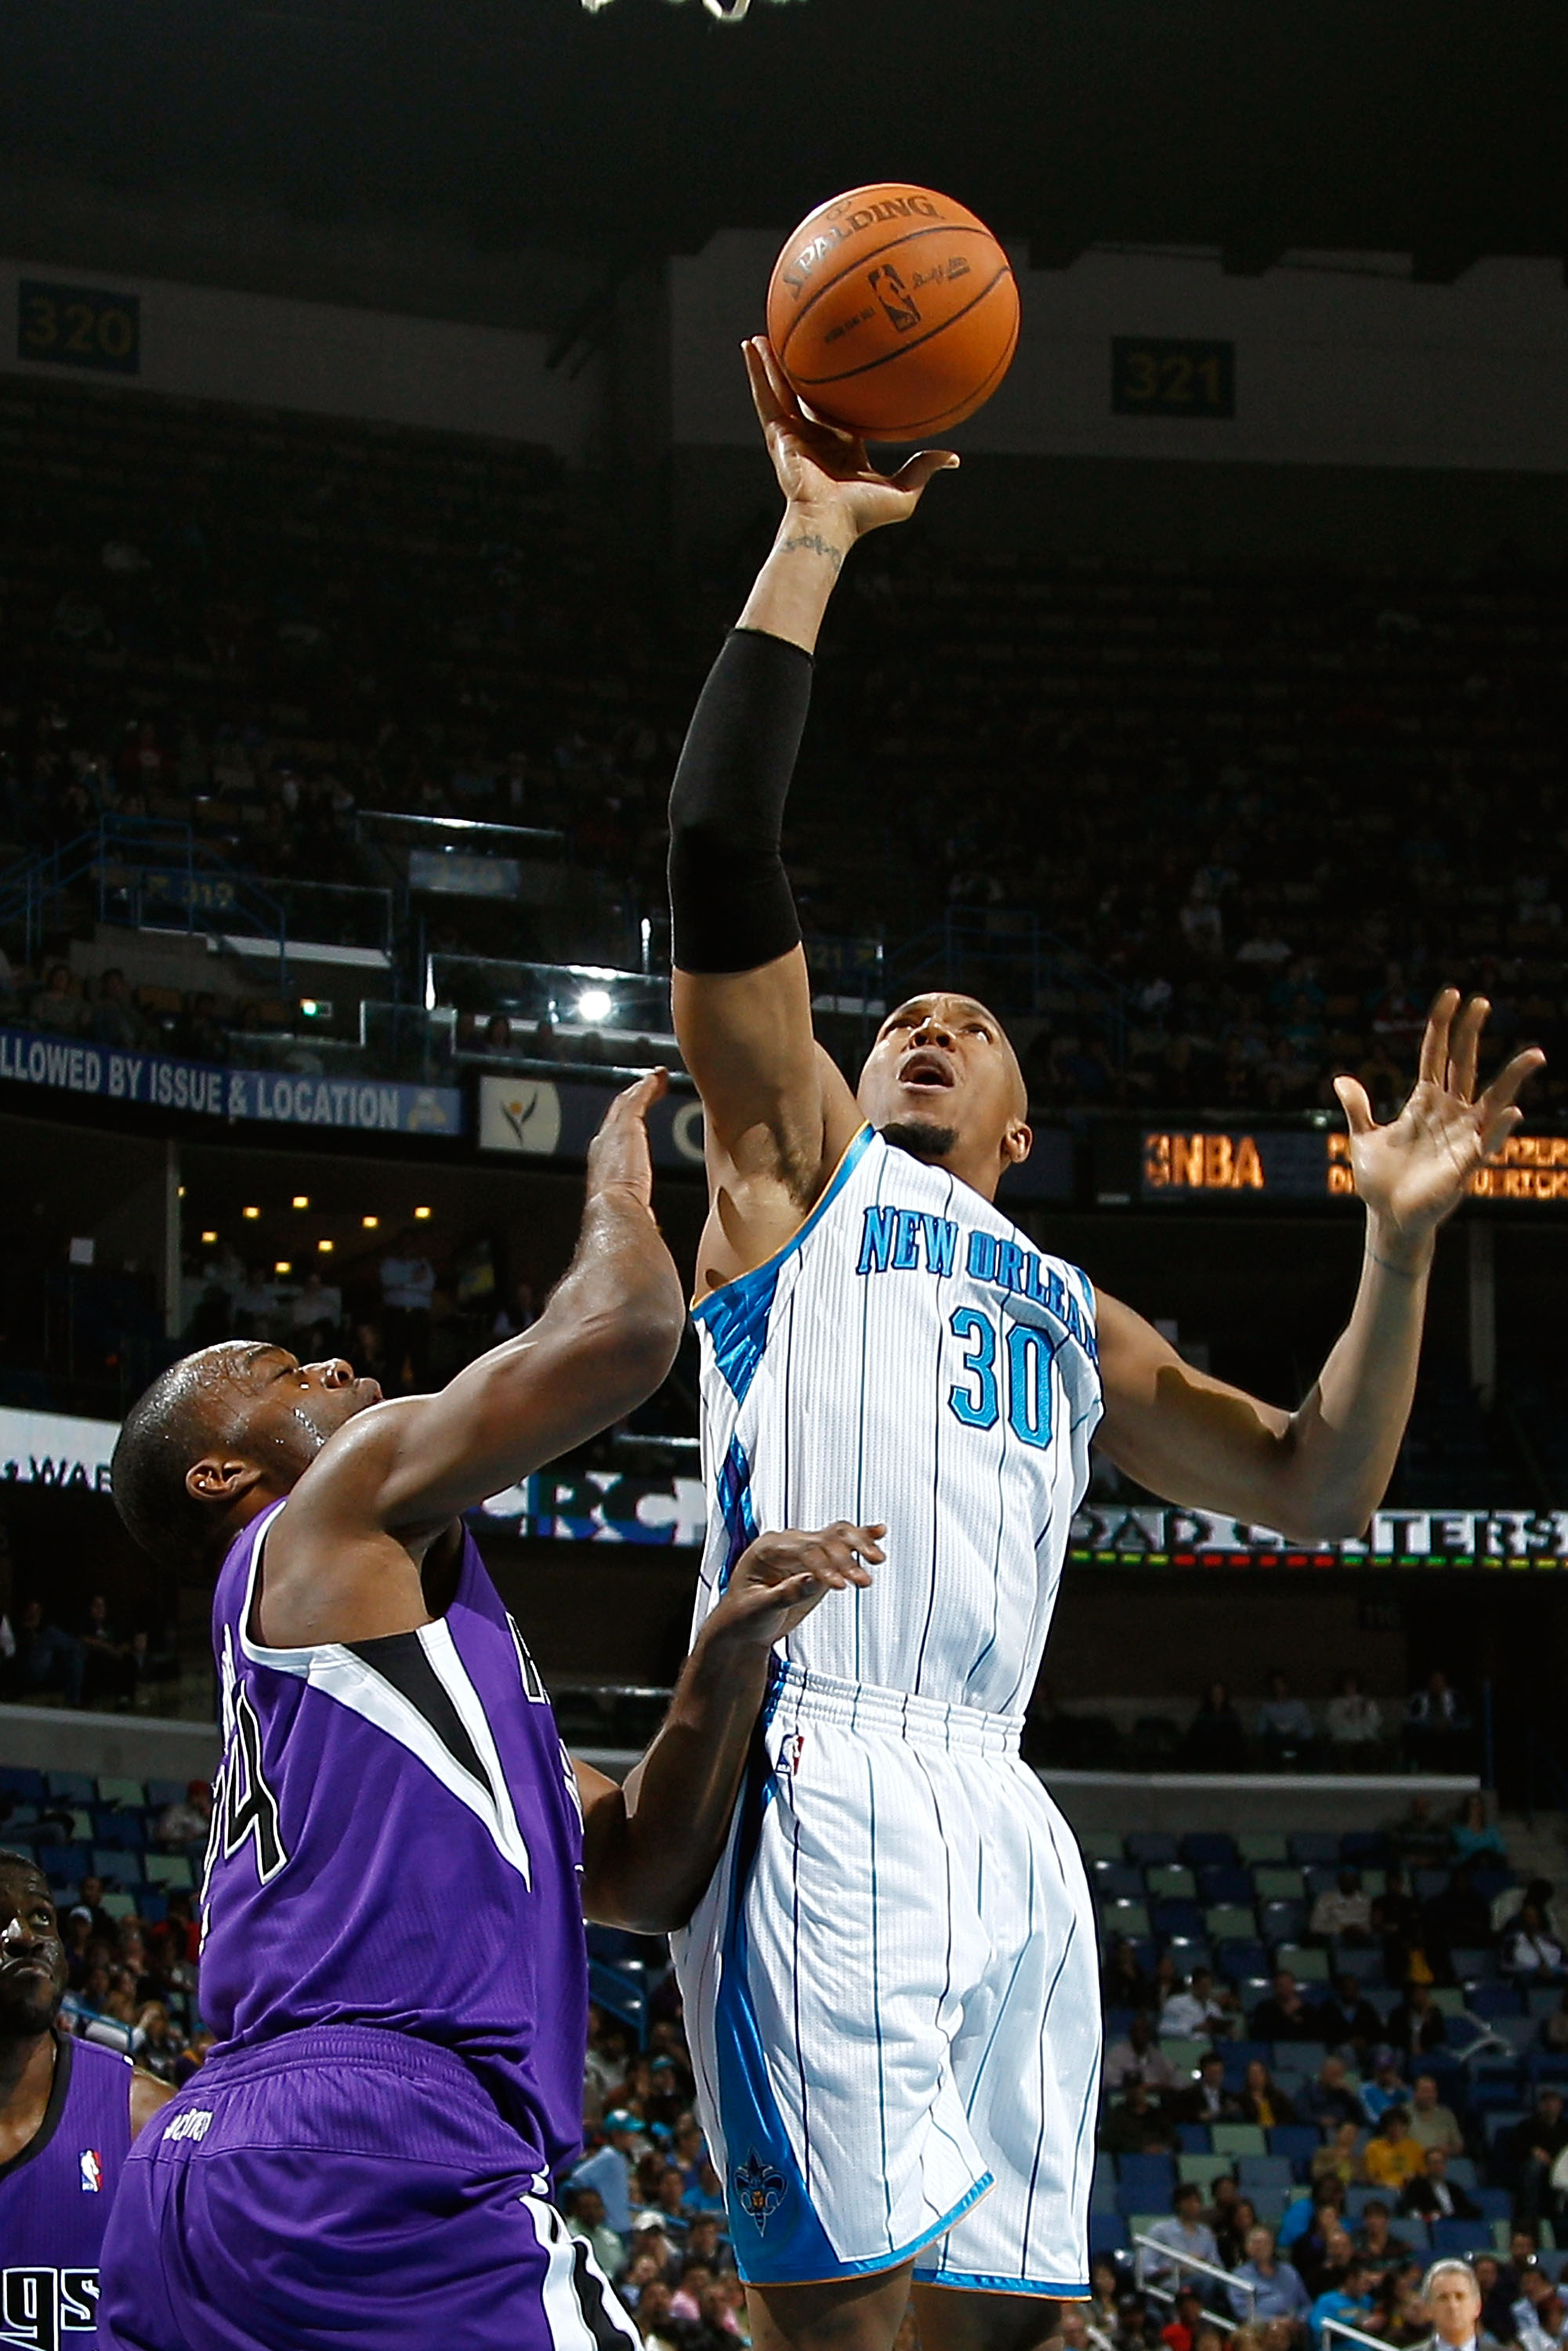 NEW ORLEANS, LA - DECEMBER 15:  David West #30 of the New Orleans Hornets shoots the ball over Carl Landry #24 of the Sacramento Kings at the New Orleans Arena on December 15, 2010 in New Orleans, Louisiana.  NOTE TO USER: User expressly acknowledges and